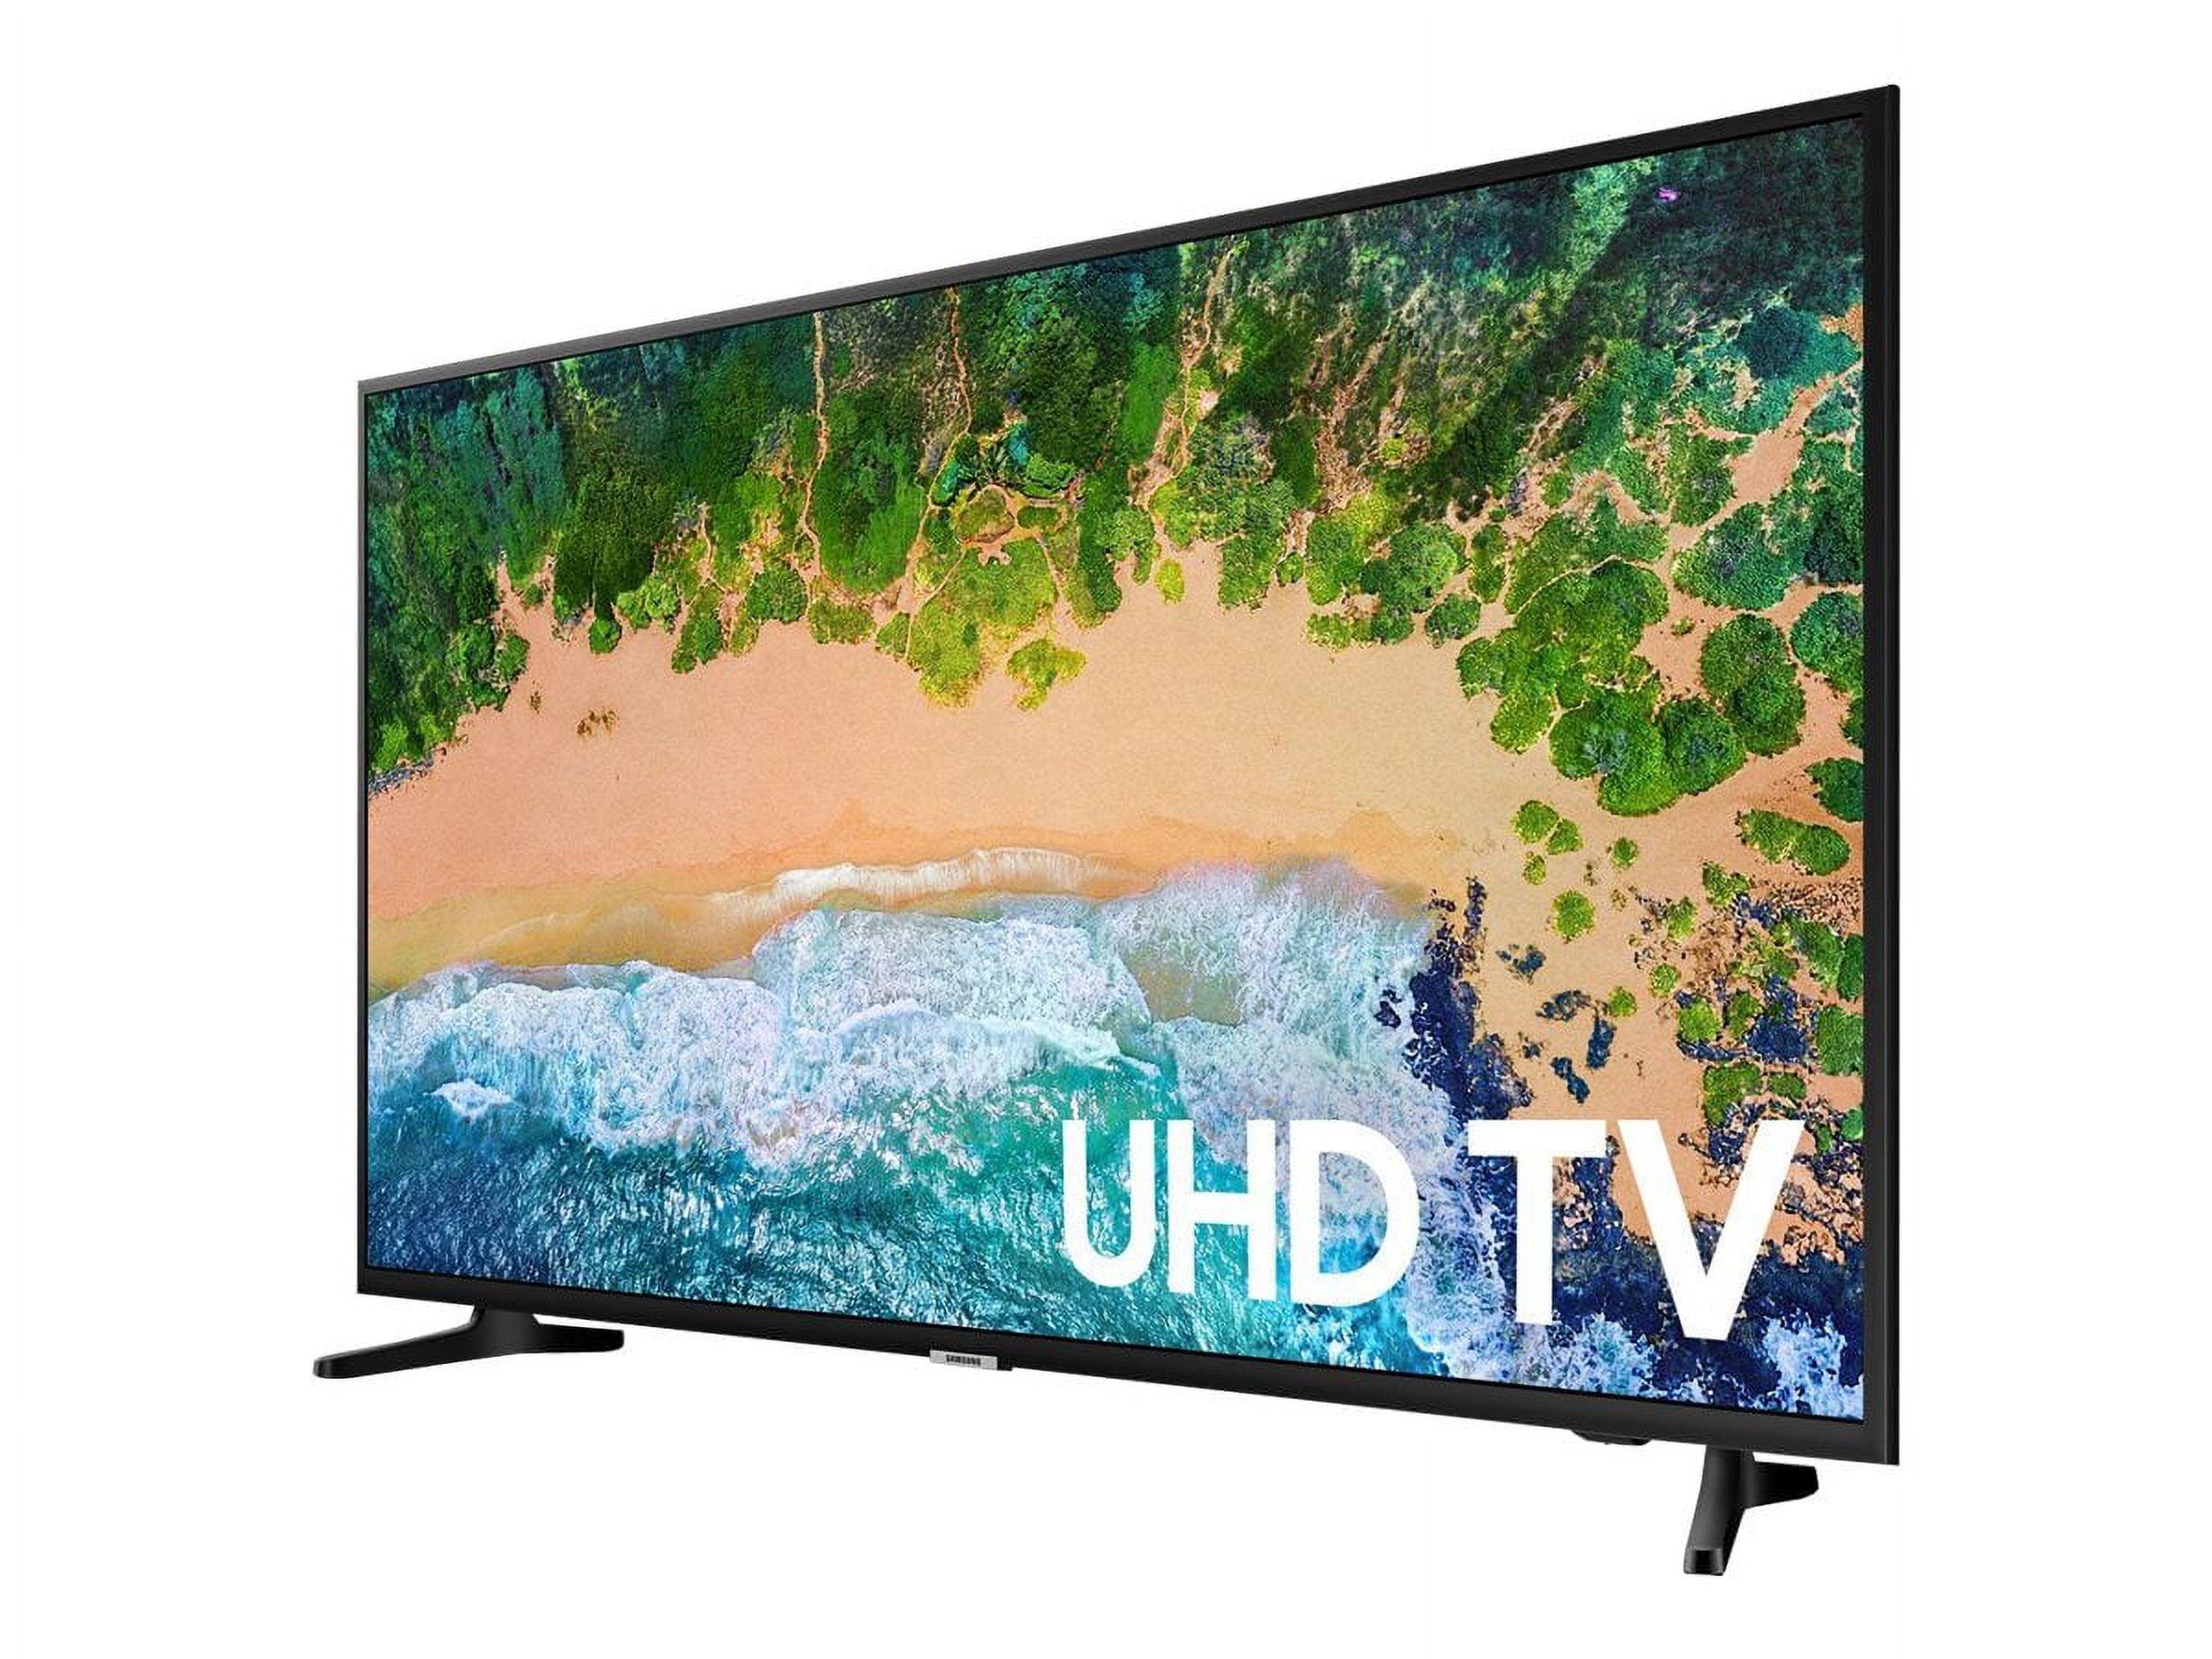 SAMSUNG 50 Class 4K UHD 2160p LED Smart TV with HDR UN50NU6900 